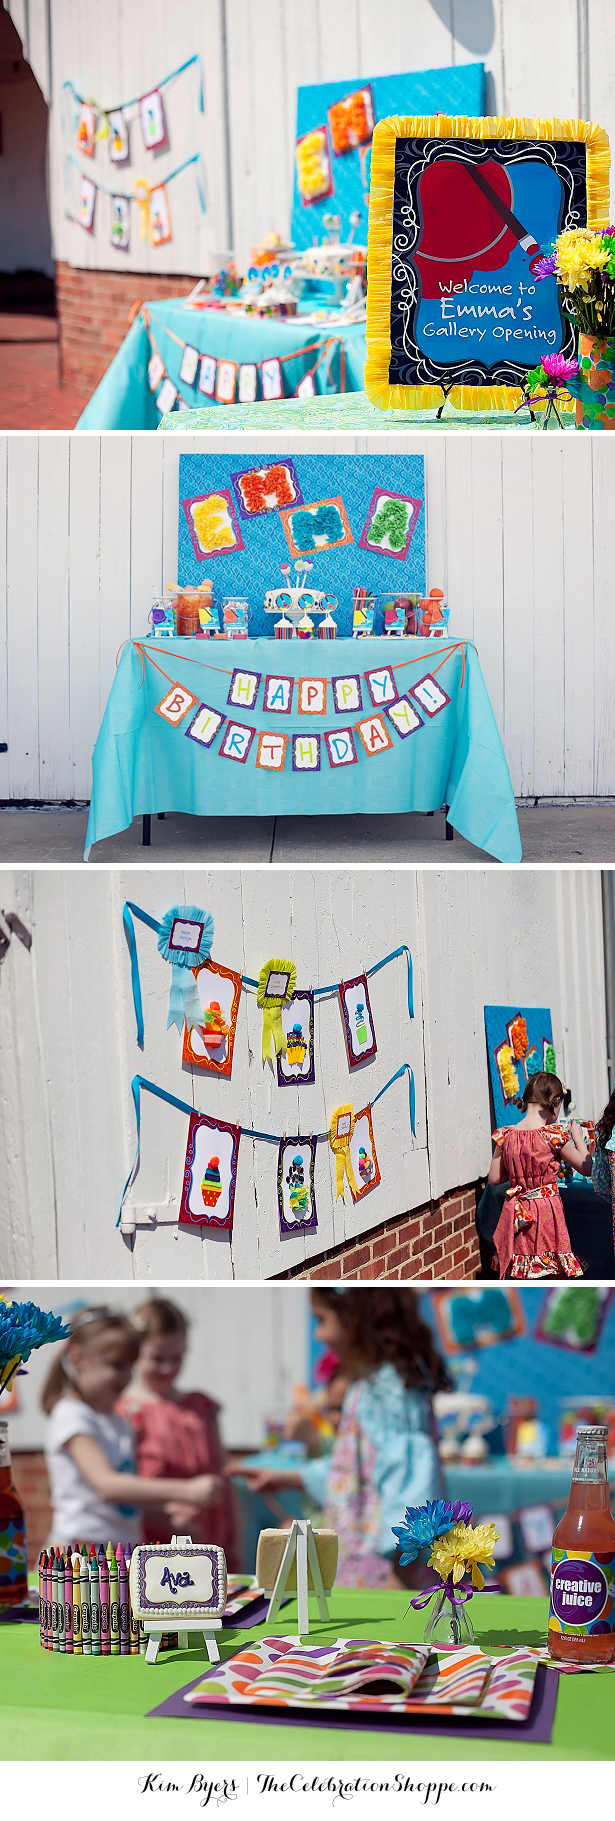 Fun and creative art birthday party ideas for your little picasso | @kimbyers TheCelebrationShoppe.com